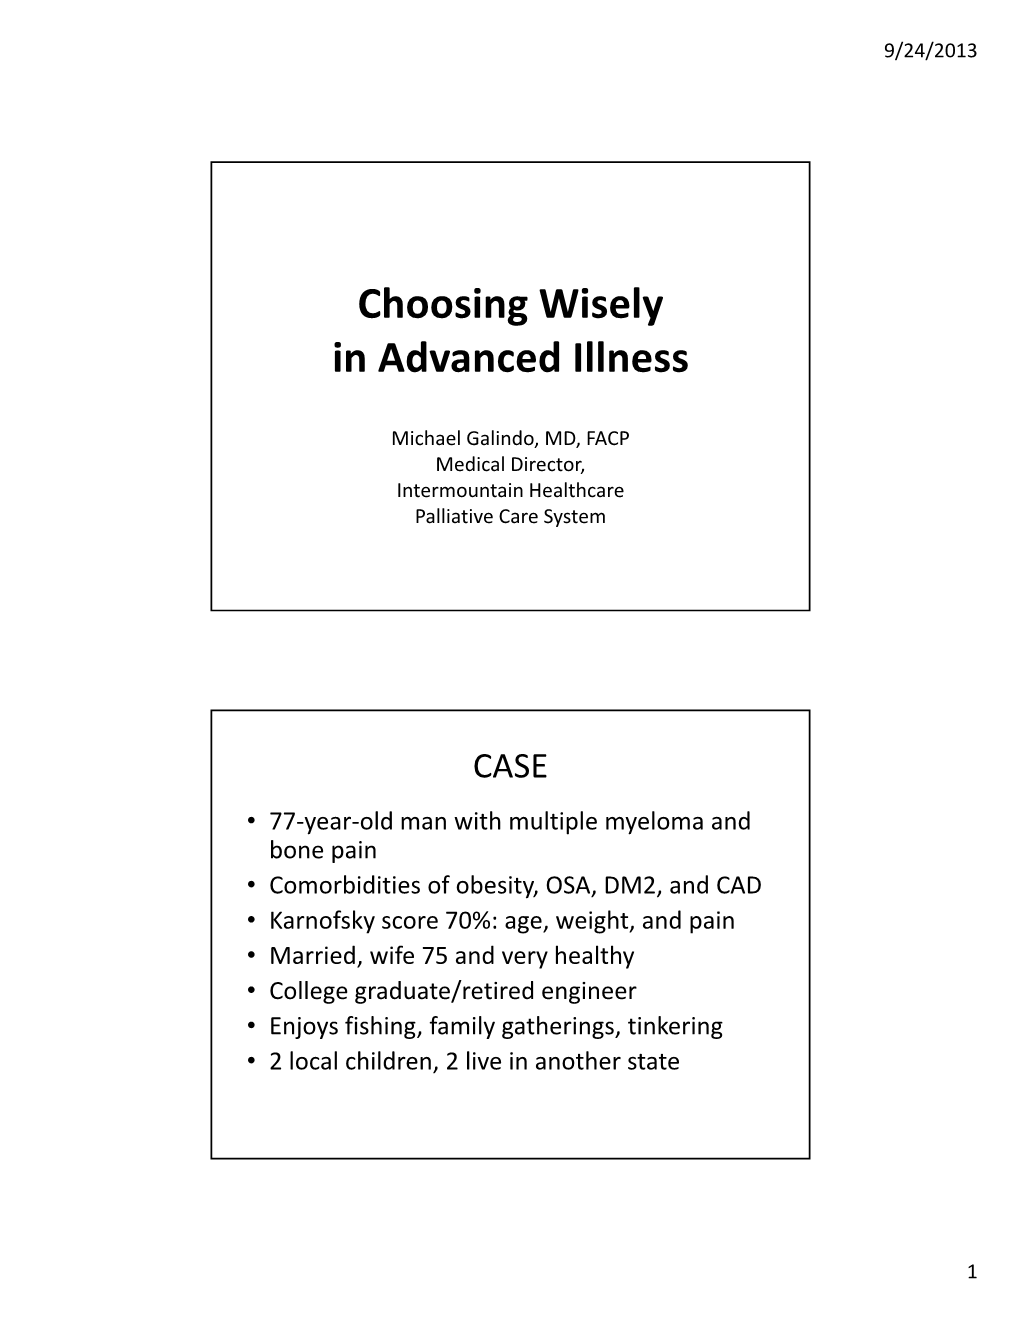 Choosing Wisely in Advanced Illness